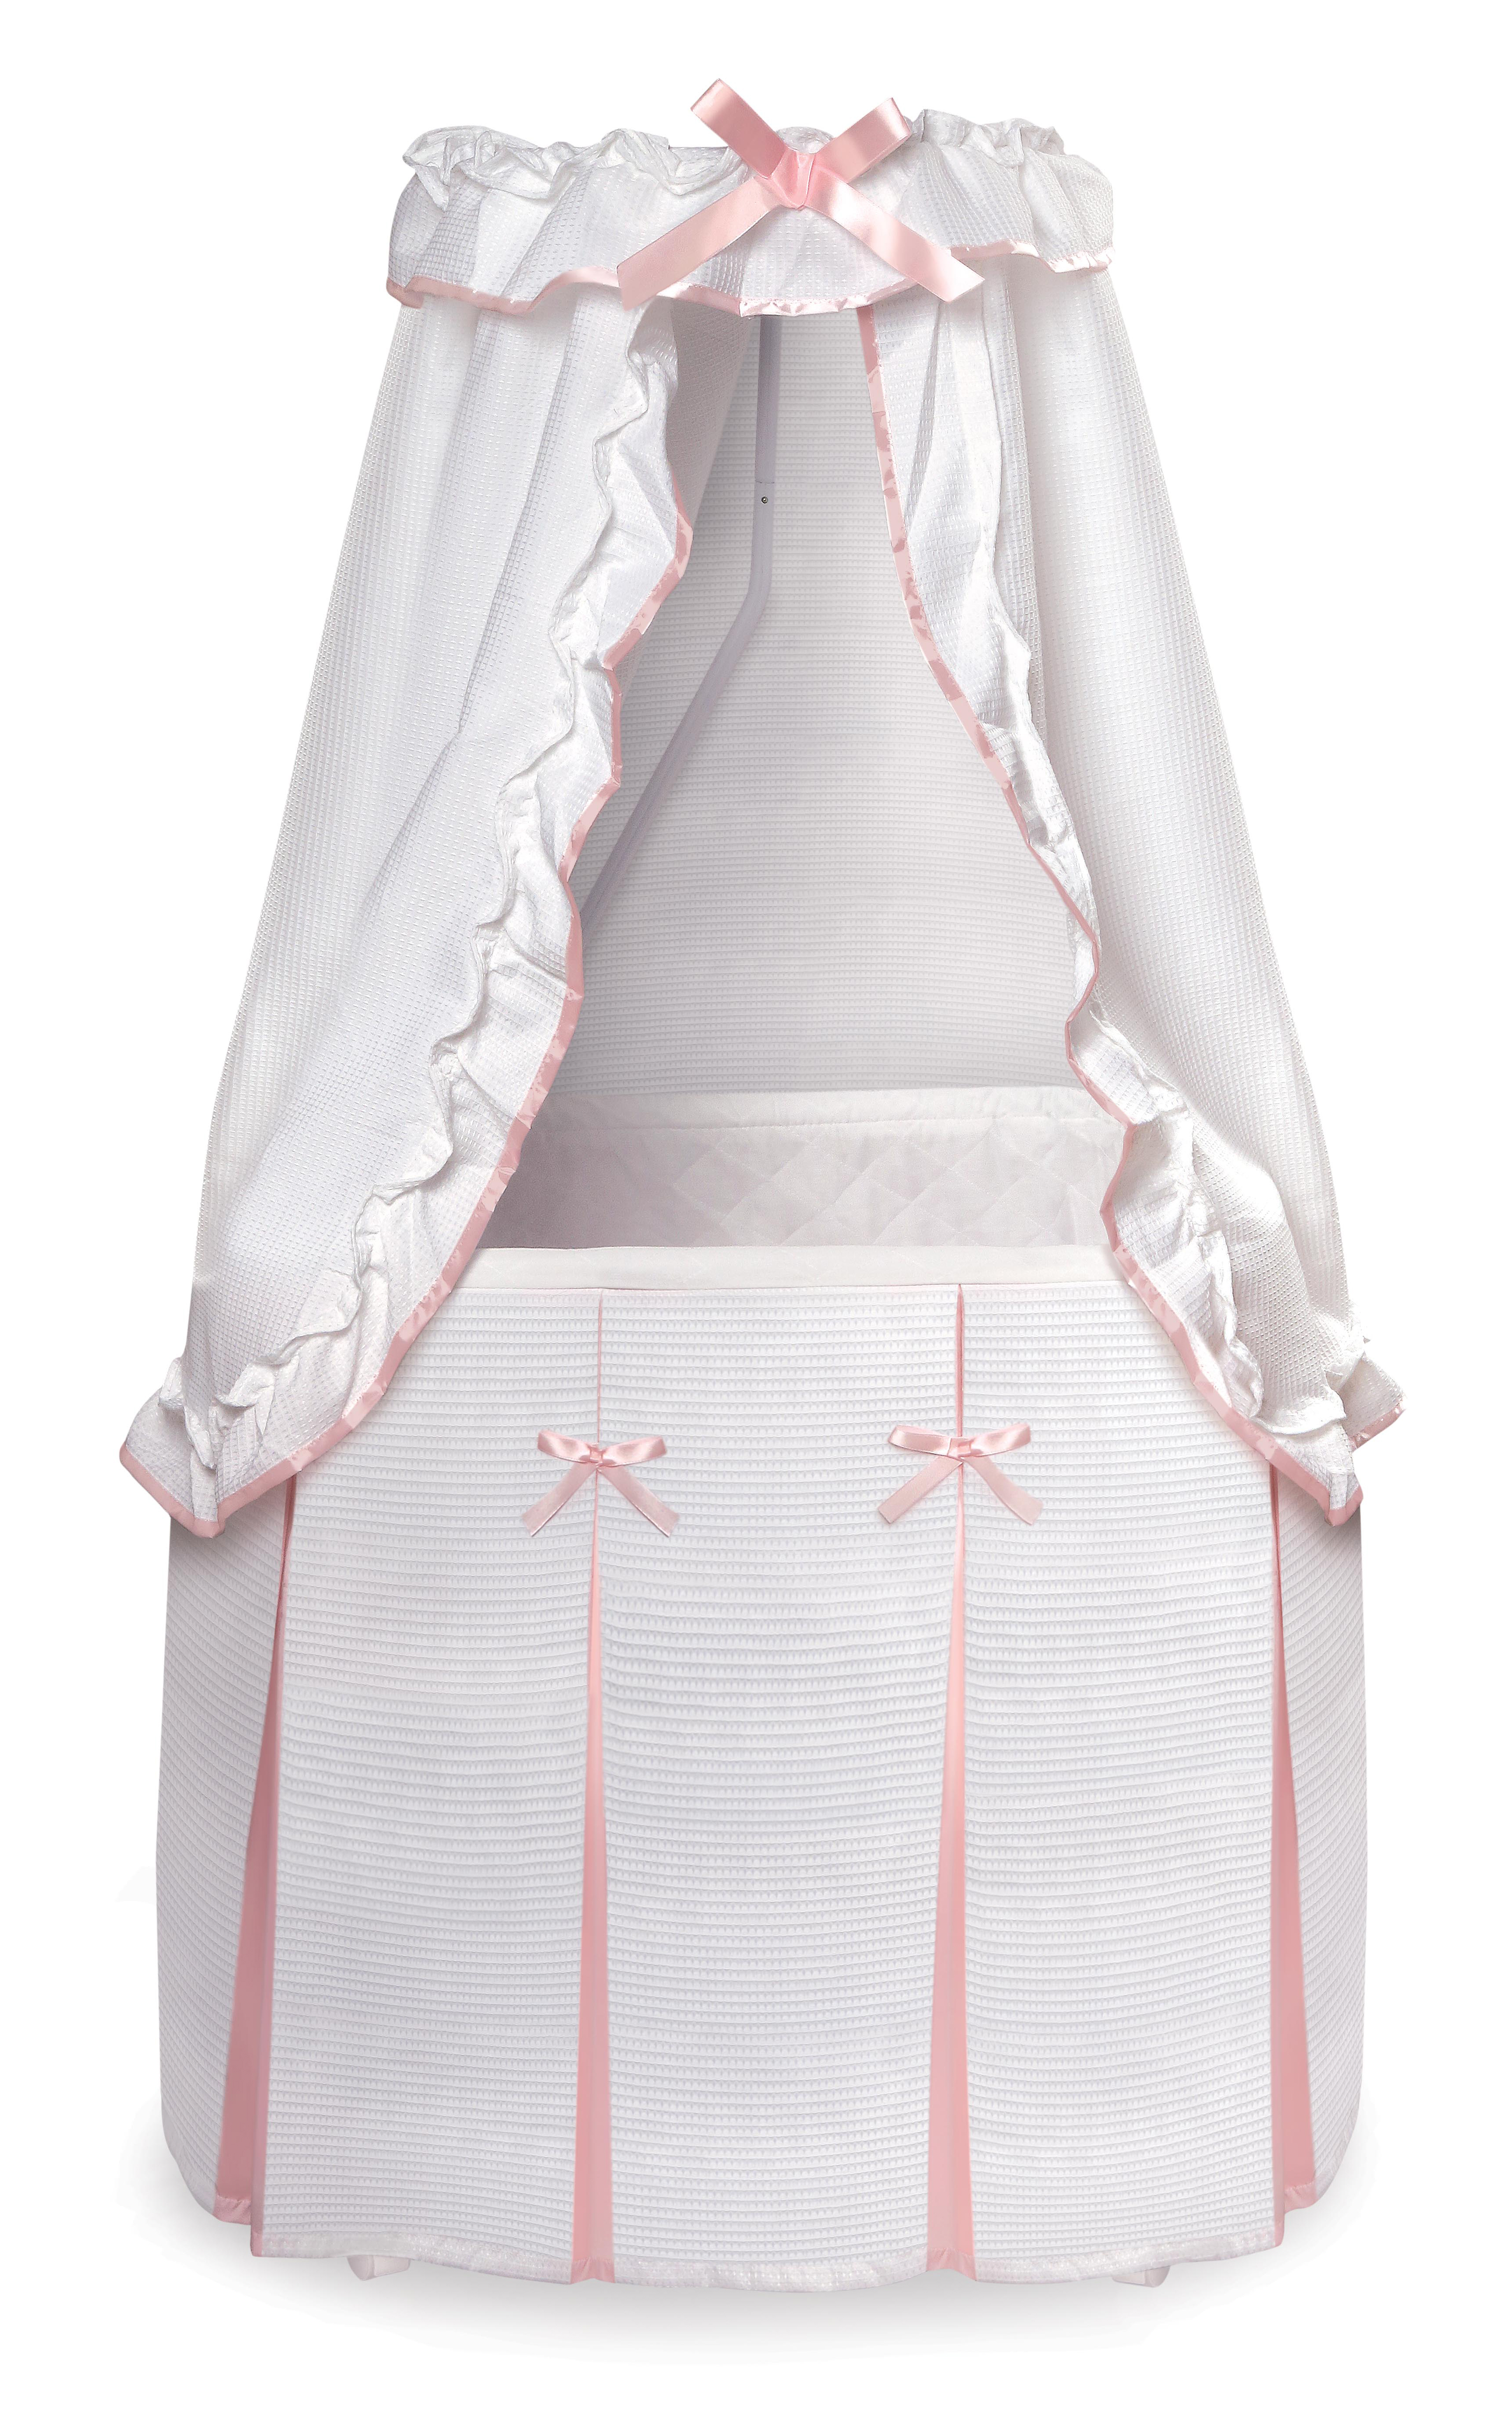 Majesty Baby Bassinet with Canopy - White/Pink Bedding